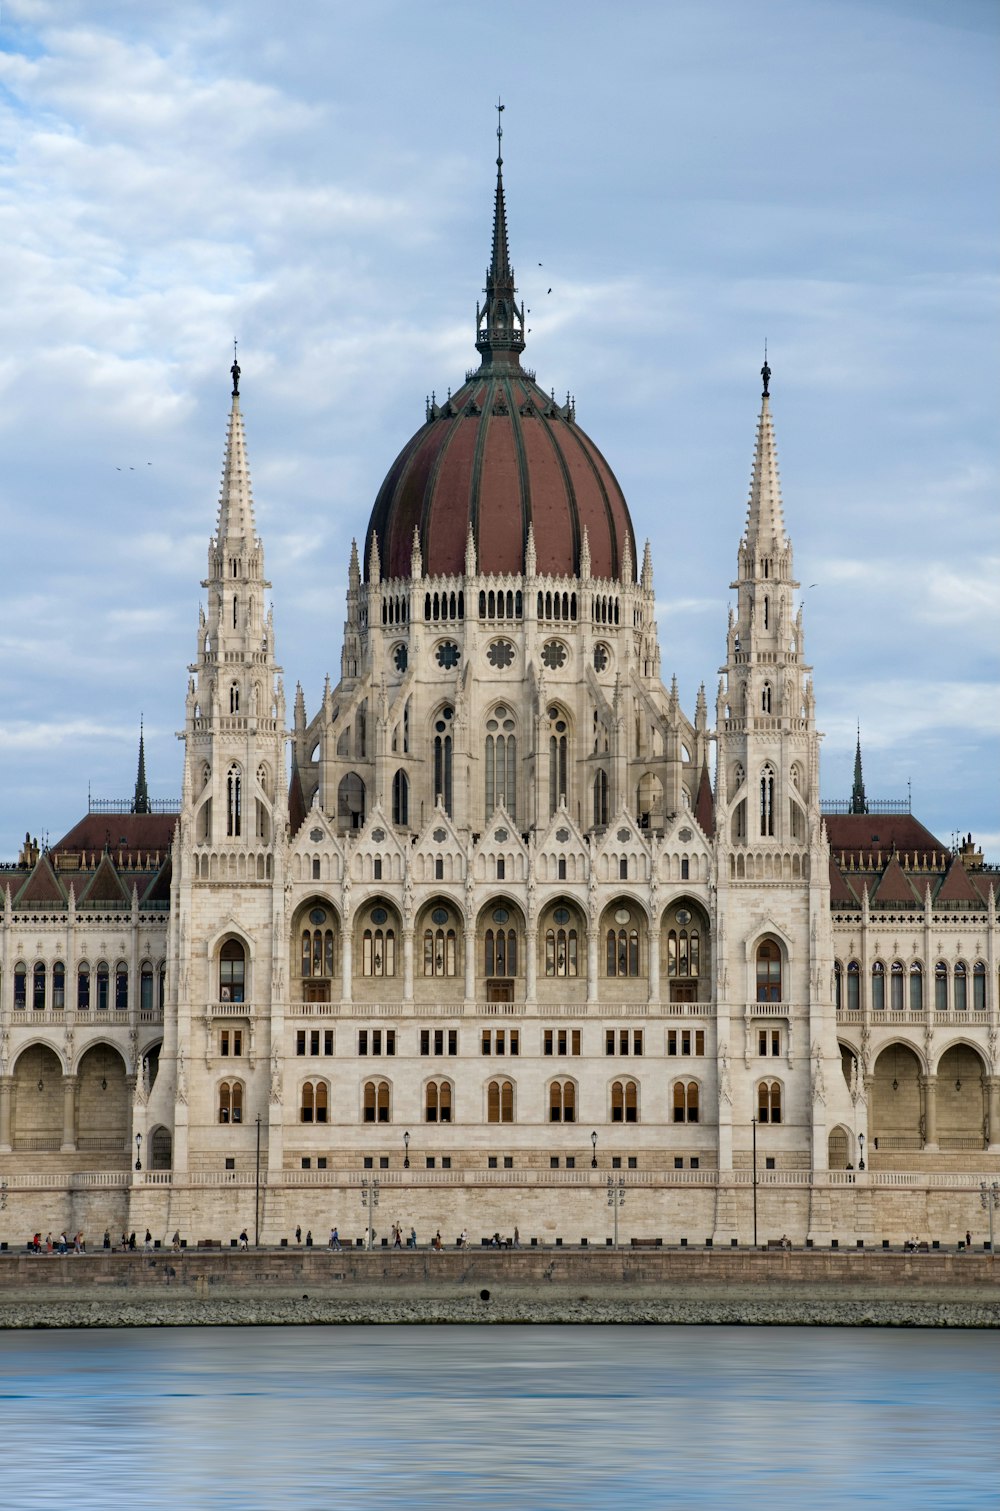 a large building with a dome on top next to a body of water